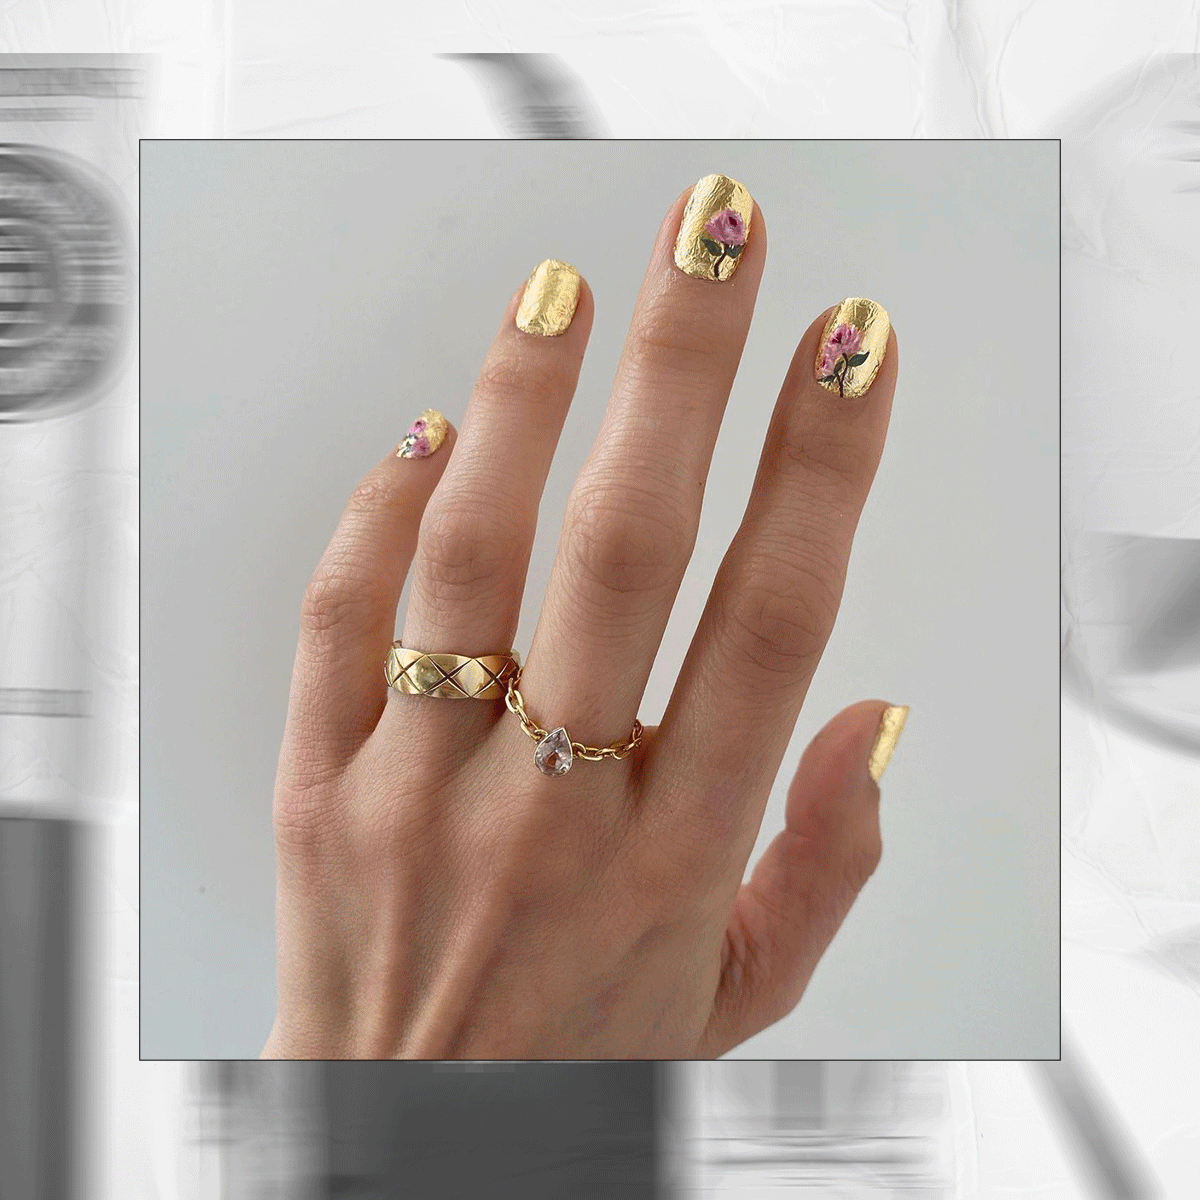 Florals For Spring Aren't Groundbreaking, But These 21 Nail Designs Are